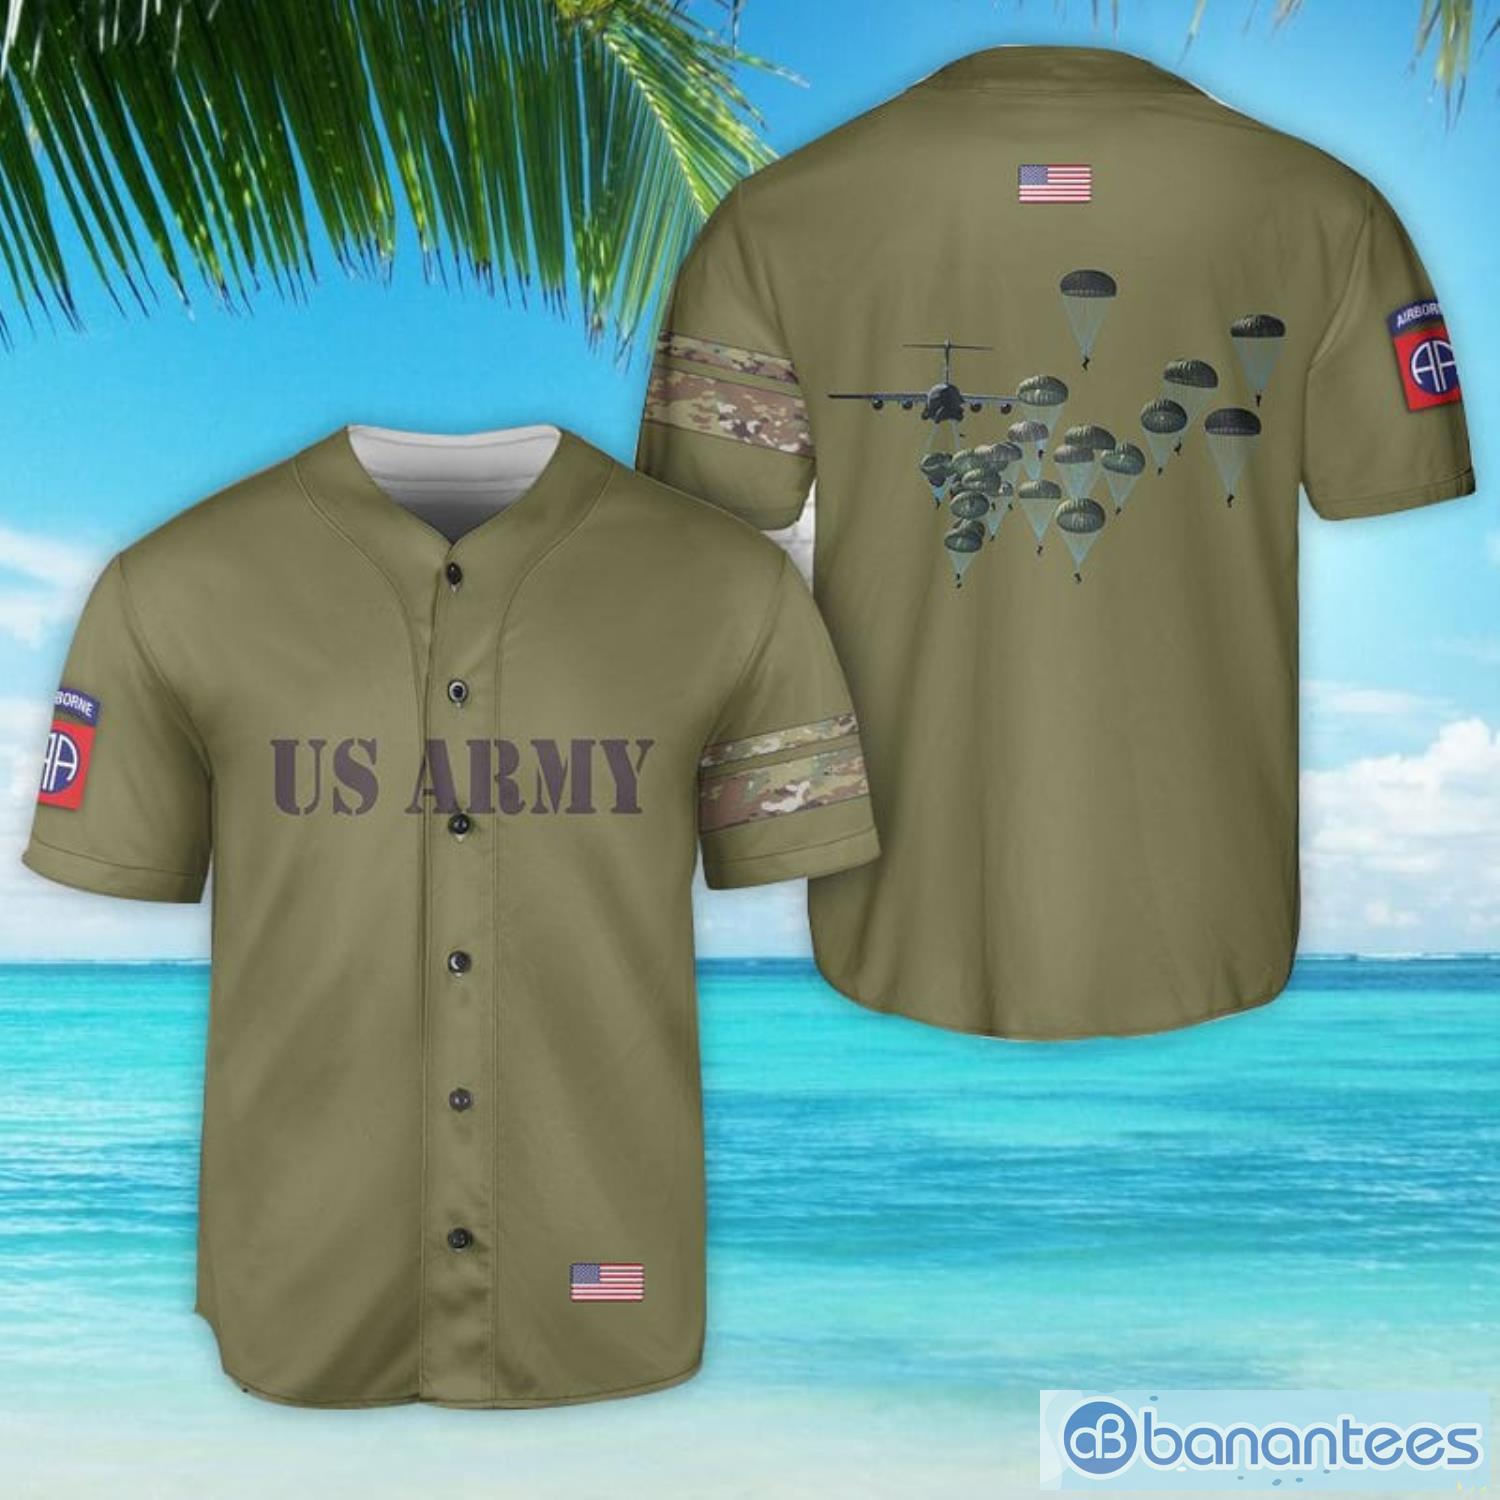 US Army Paratroopers With The 82nd Airborne Division Parachute Baseball Jersey Shirt For Men And Women Product Photo 1